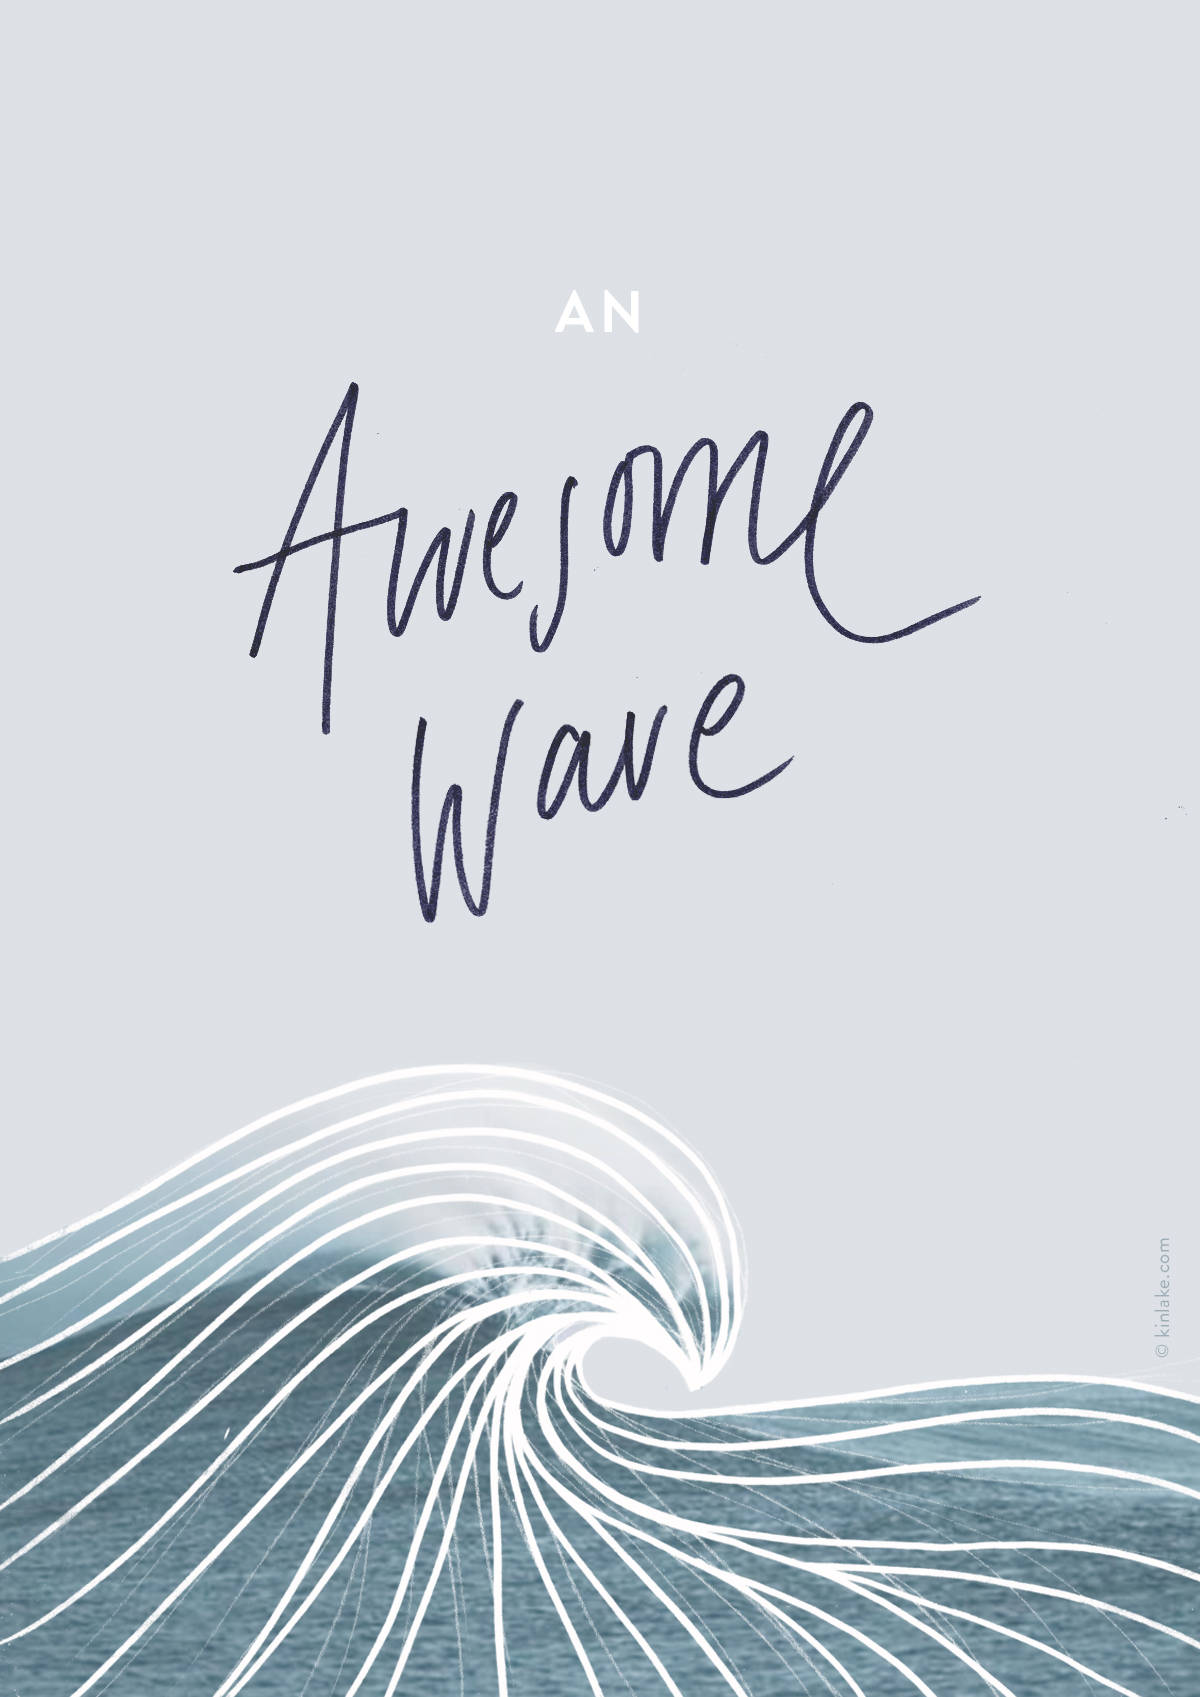 An-awesome-wave-kinlake